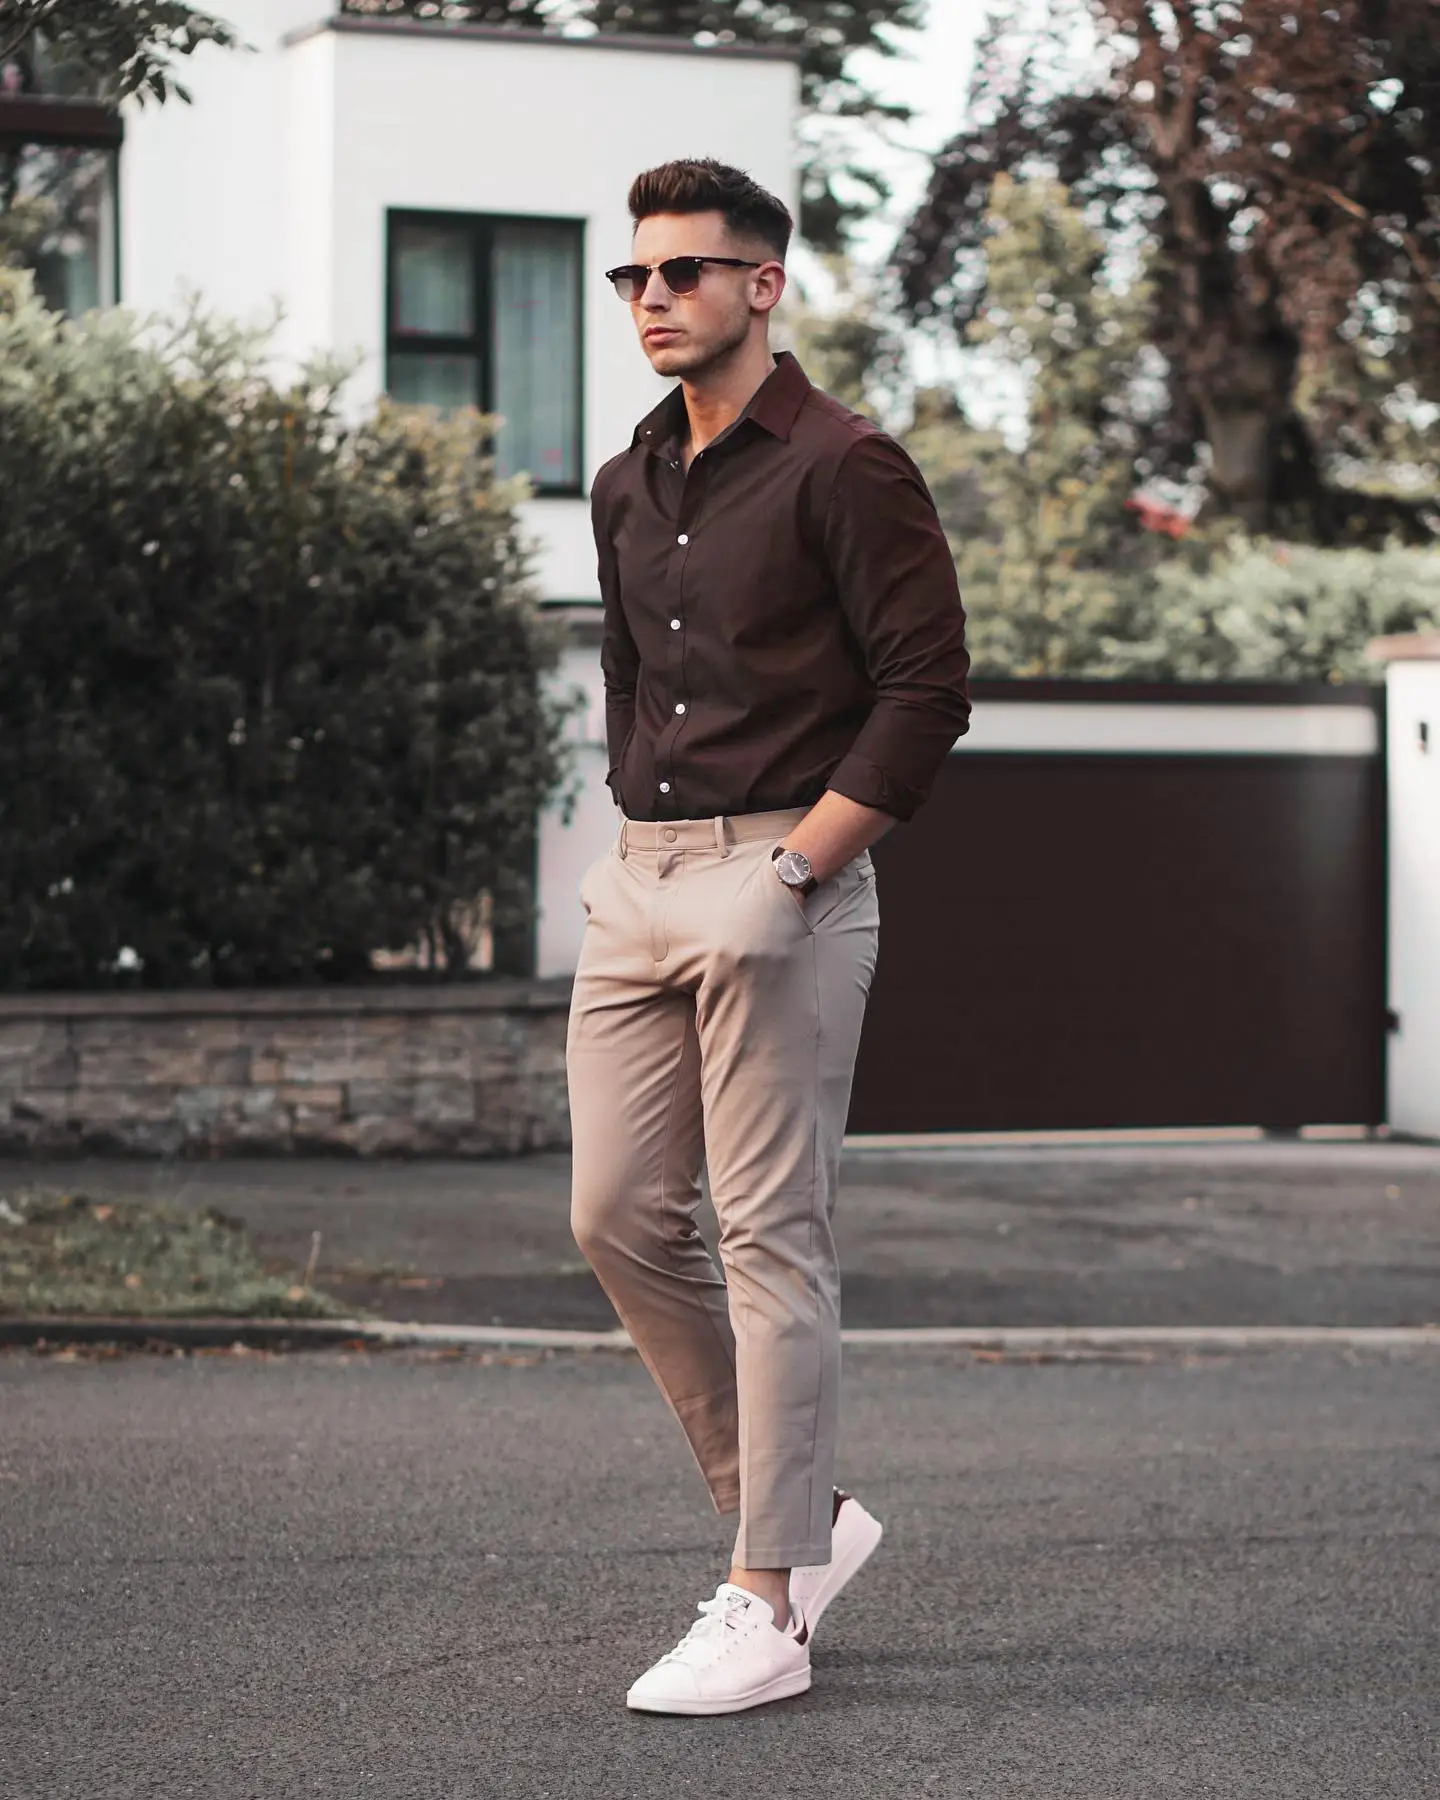 8 Brown pant matching shirt Combinations ideas for men